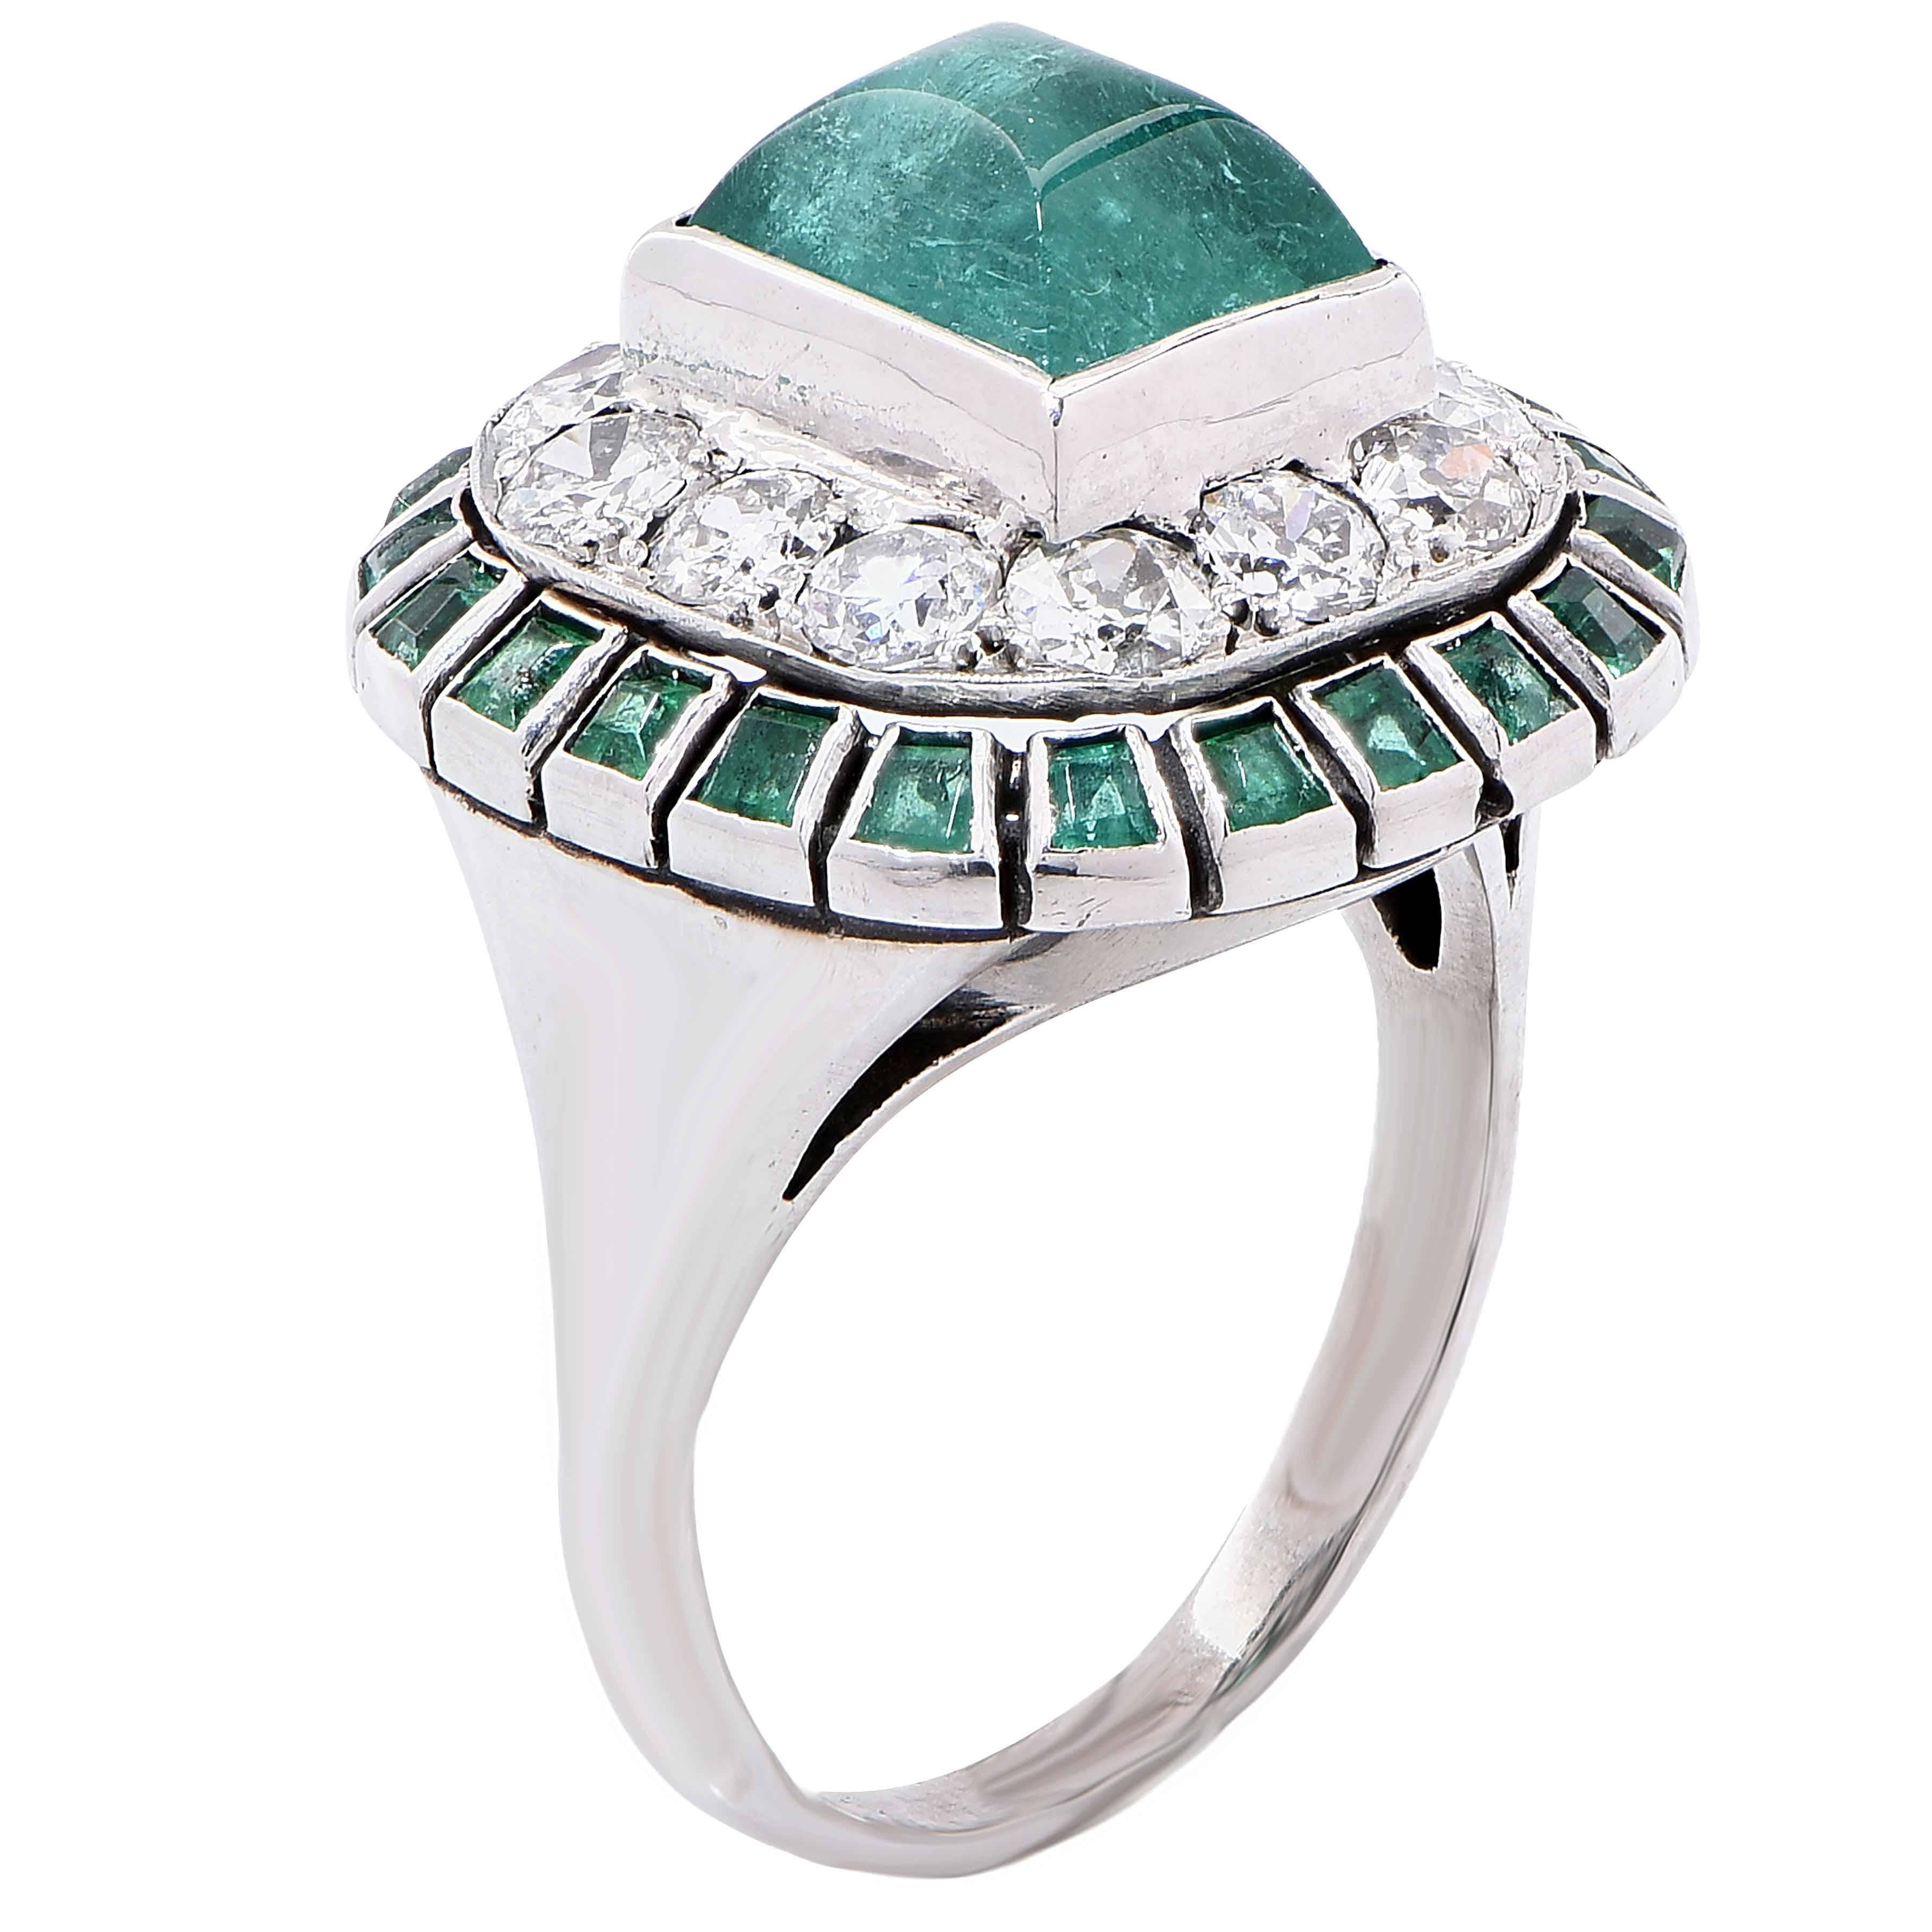 1920s Sugarloaf Cabochon Cut Emerald and Diamond 18 Karat White Gold Ring In Excellent Condition For Sale In Bay Harbor Islands, FL